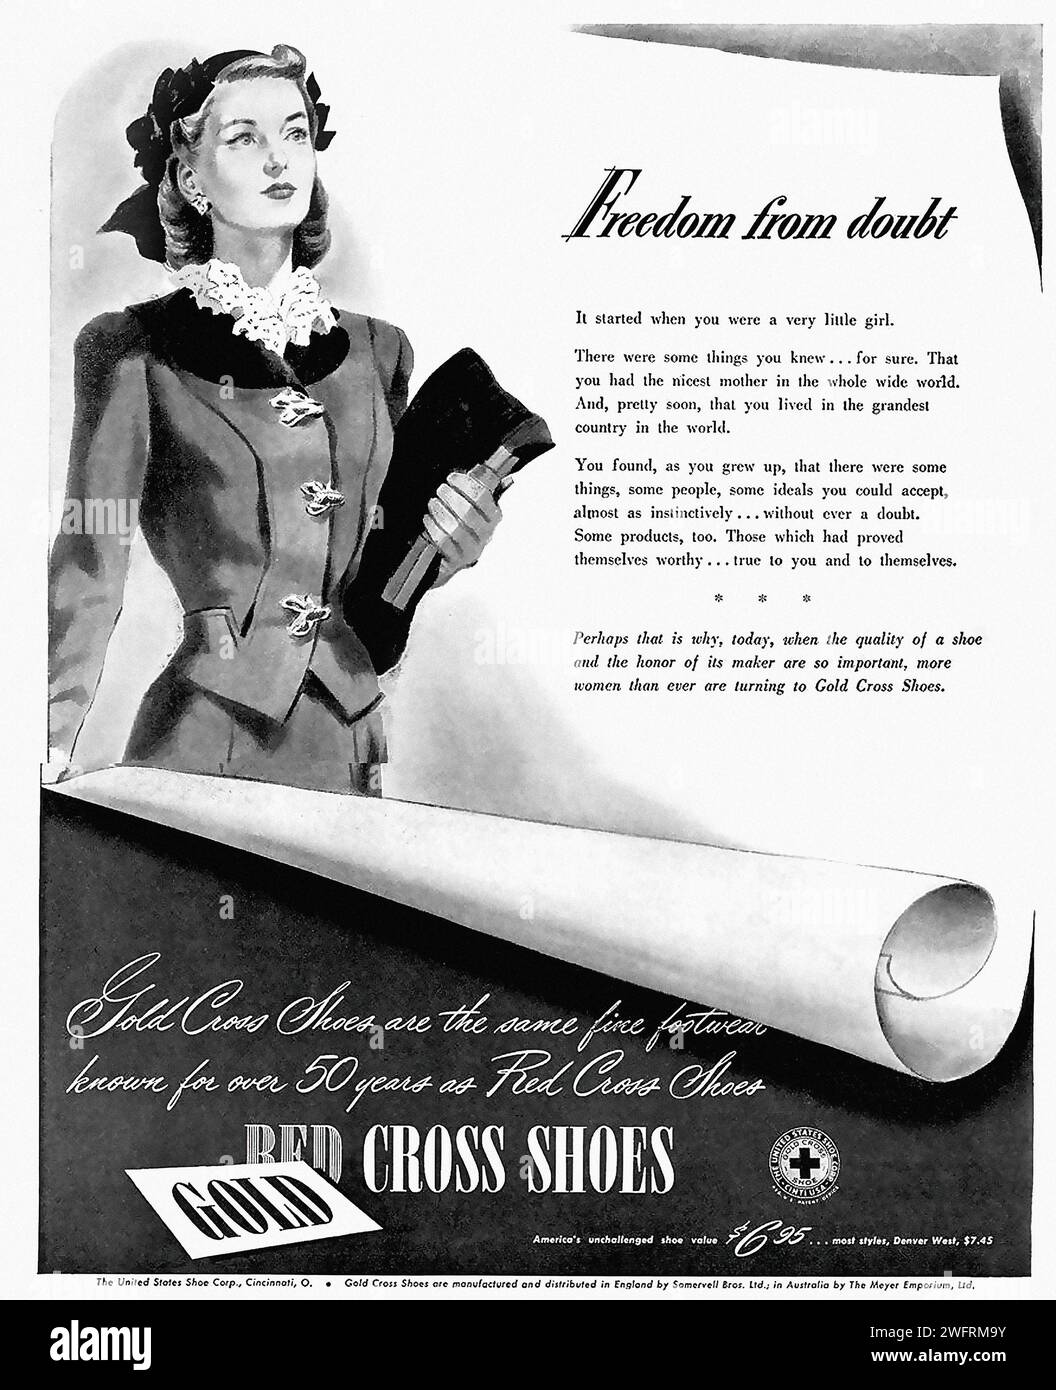 “GOLD CROSS SHOES”  This is a black and white vintage advertisement for Gold Cross Shoes, originating from the United States during the World War II era. The advertisement features a woman in a suit and hat, alongside an image of a shoe. The text emphasizes the perfect fit, comfort, and style of Gold Cross Shoes, appealing to the consumer’s desire for modernity, grace, and assurance. The graphic style is typical of the period, with bold capitalized text and a simple, yet effective layout against a plain white background. - American (U.S.) advertising, World War II era Stock Photo